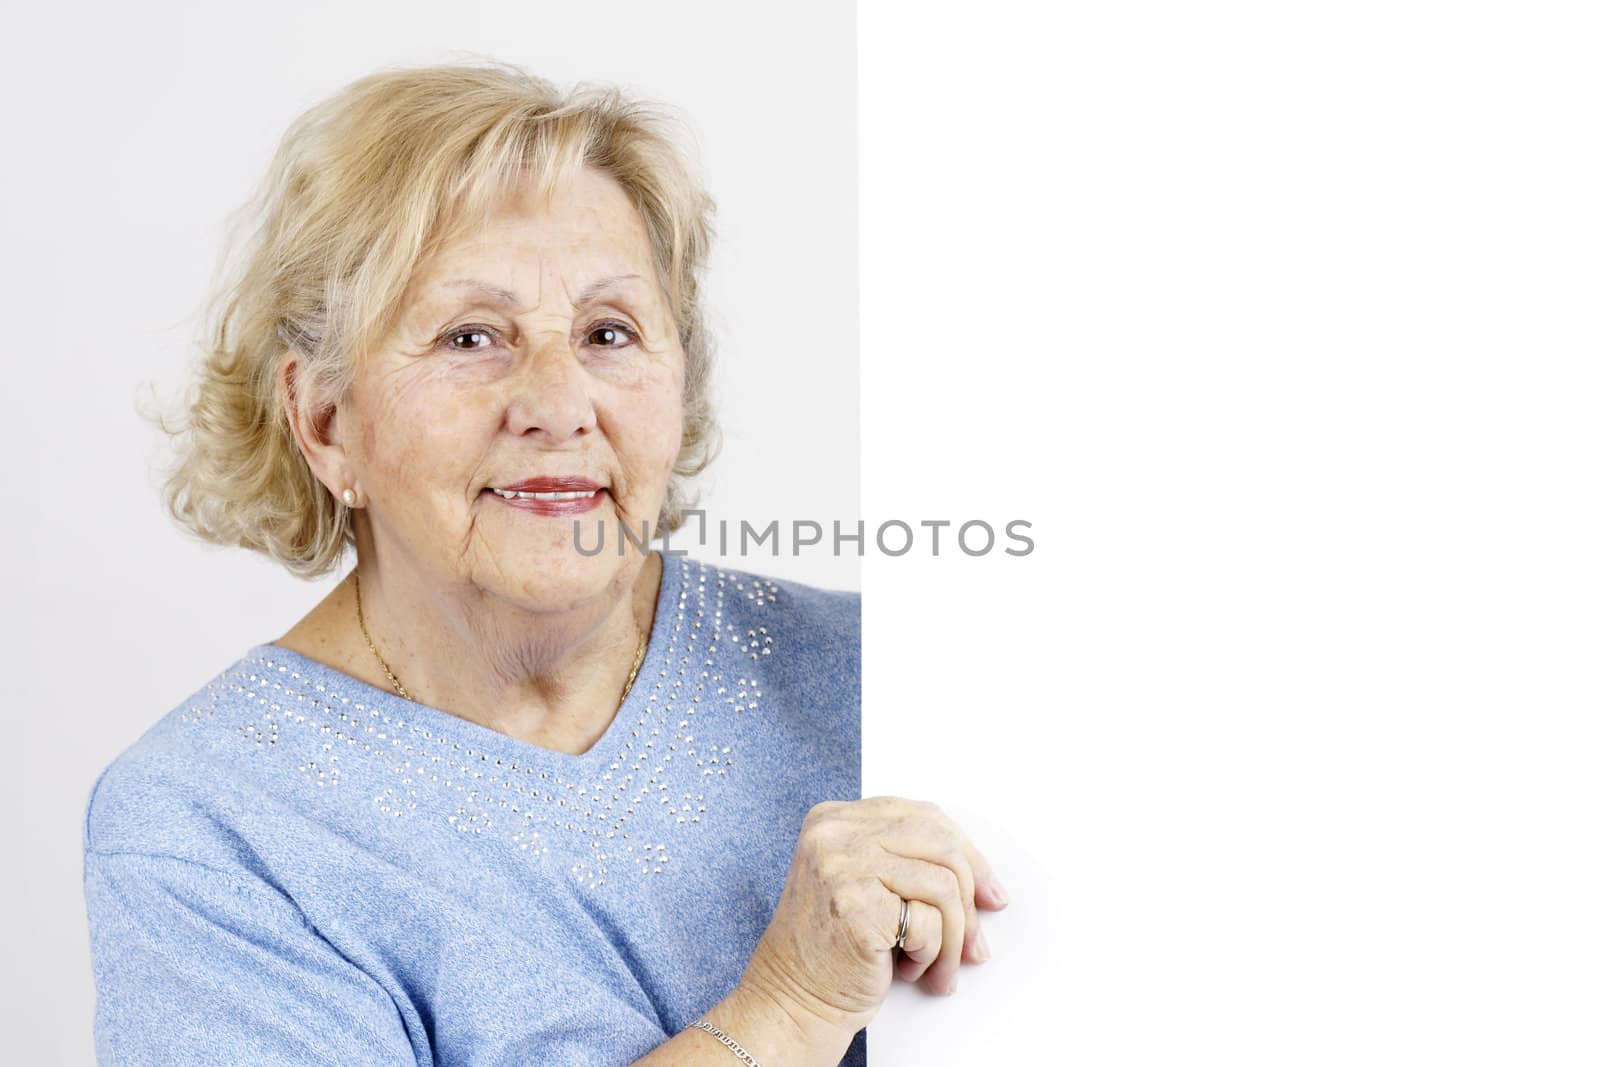 Friendly and smiling senior woman holding a blank white sign or placard ready for advertisement or information.